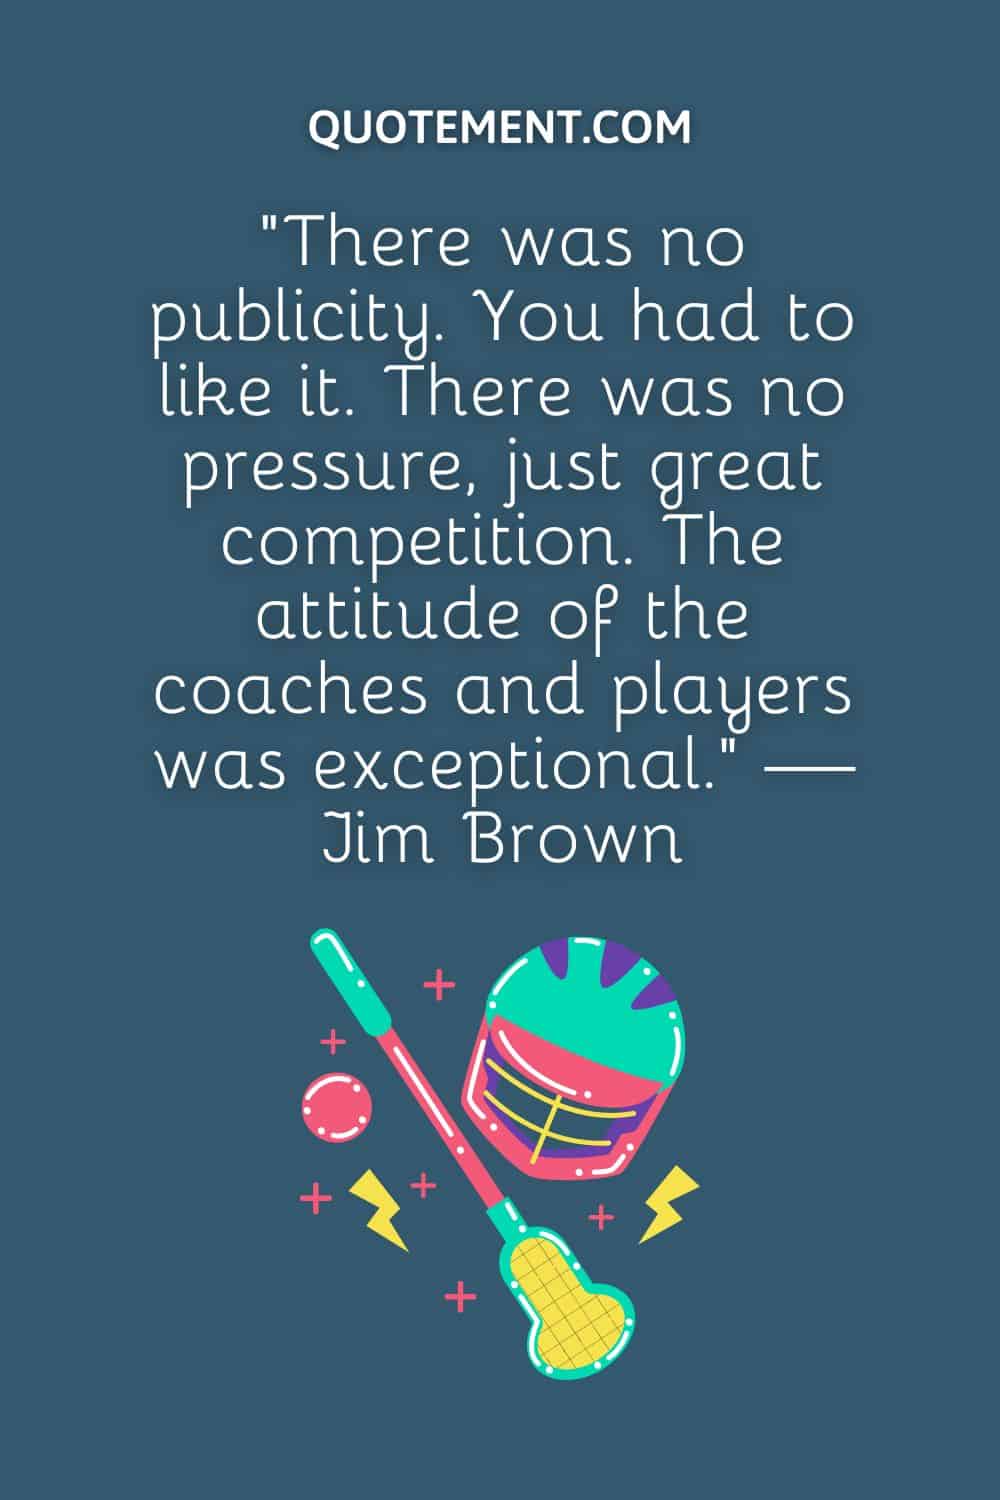 “There was no publicity. You had to like it. There was no pressure, just great competition. The attitude of the coaches and players was exceptional.” — Jim Brown